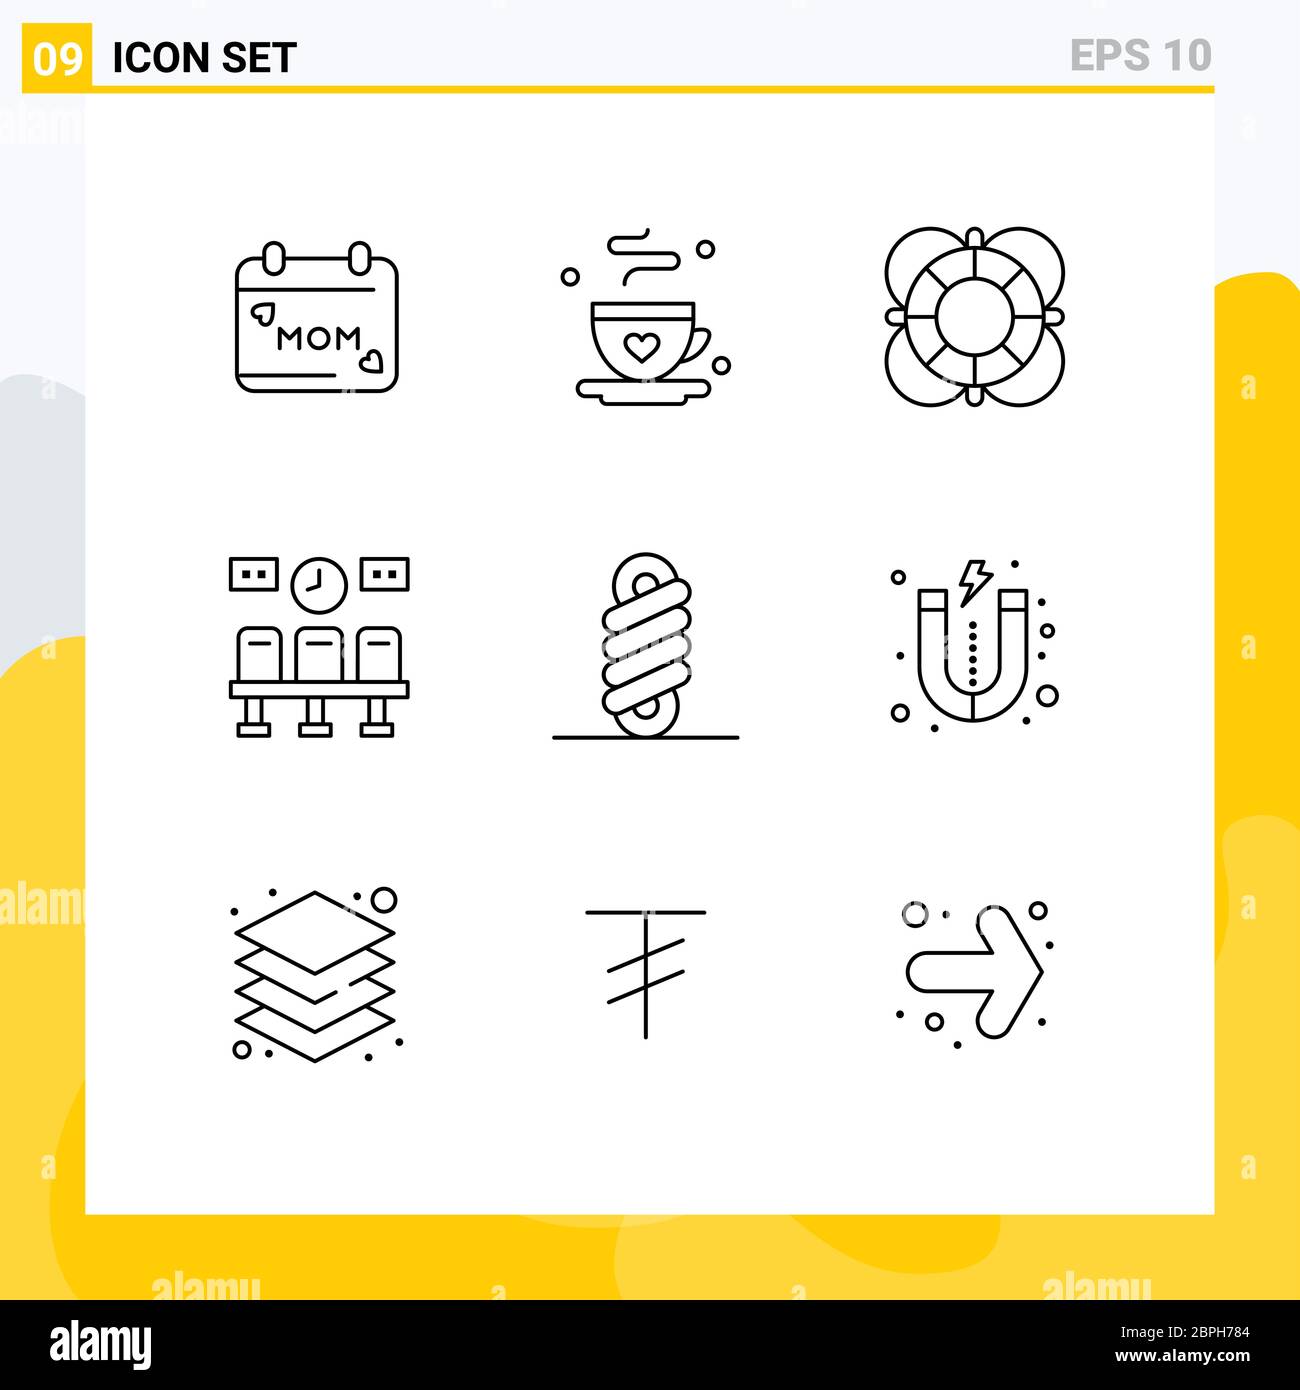 Set of 9 Modern UI Icons Symbols Signs for double, transportation, essentials, train, support Editable Vector Design Elements Stock Vector